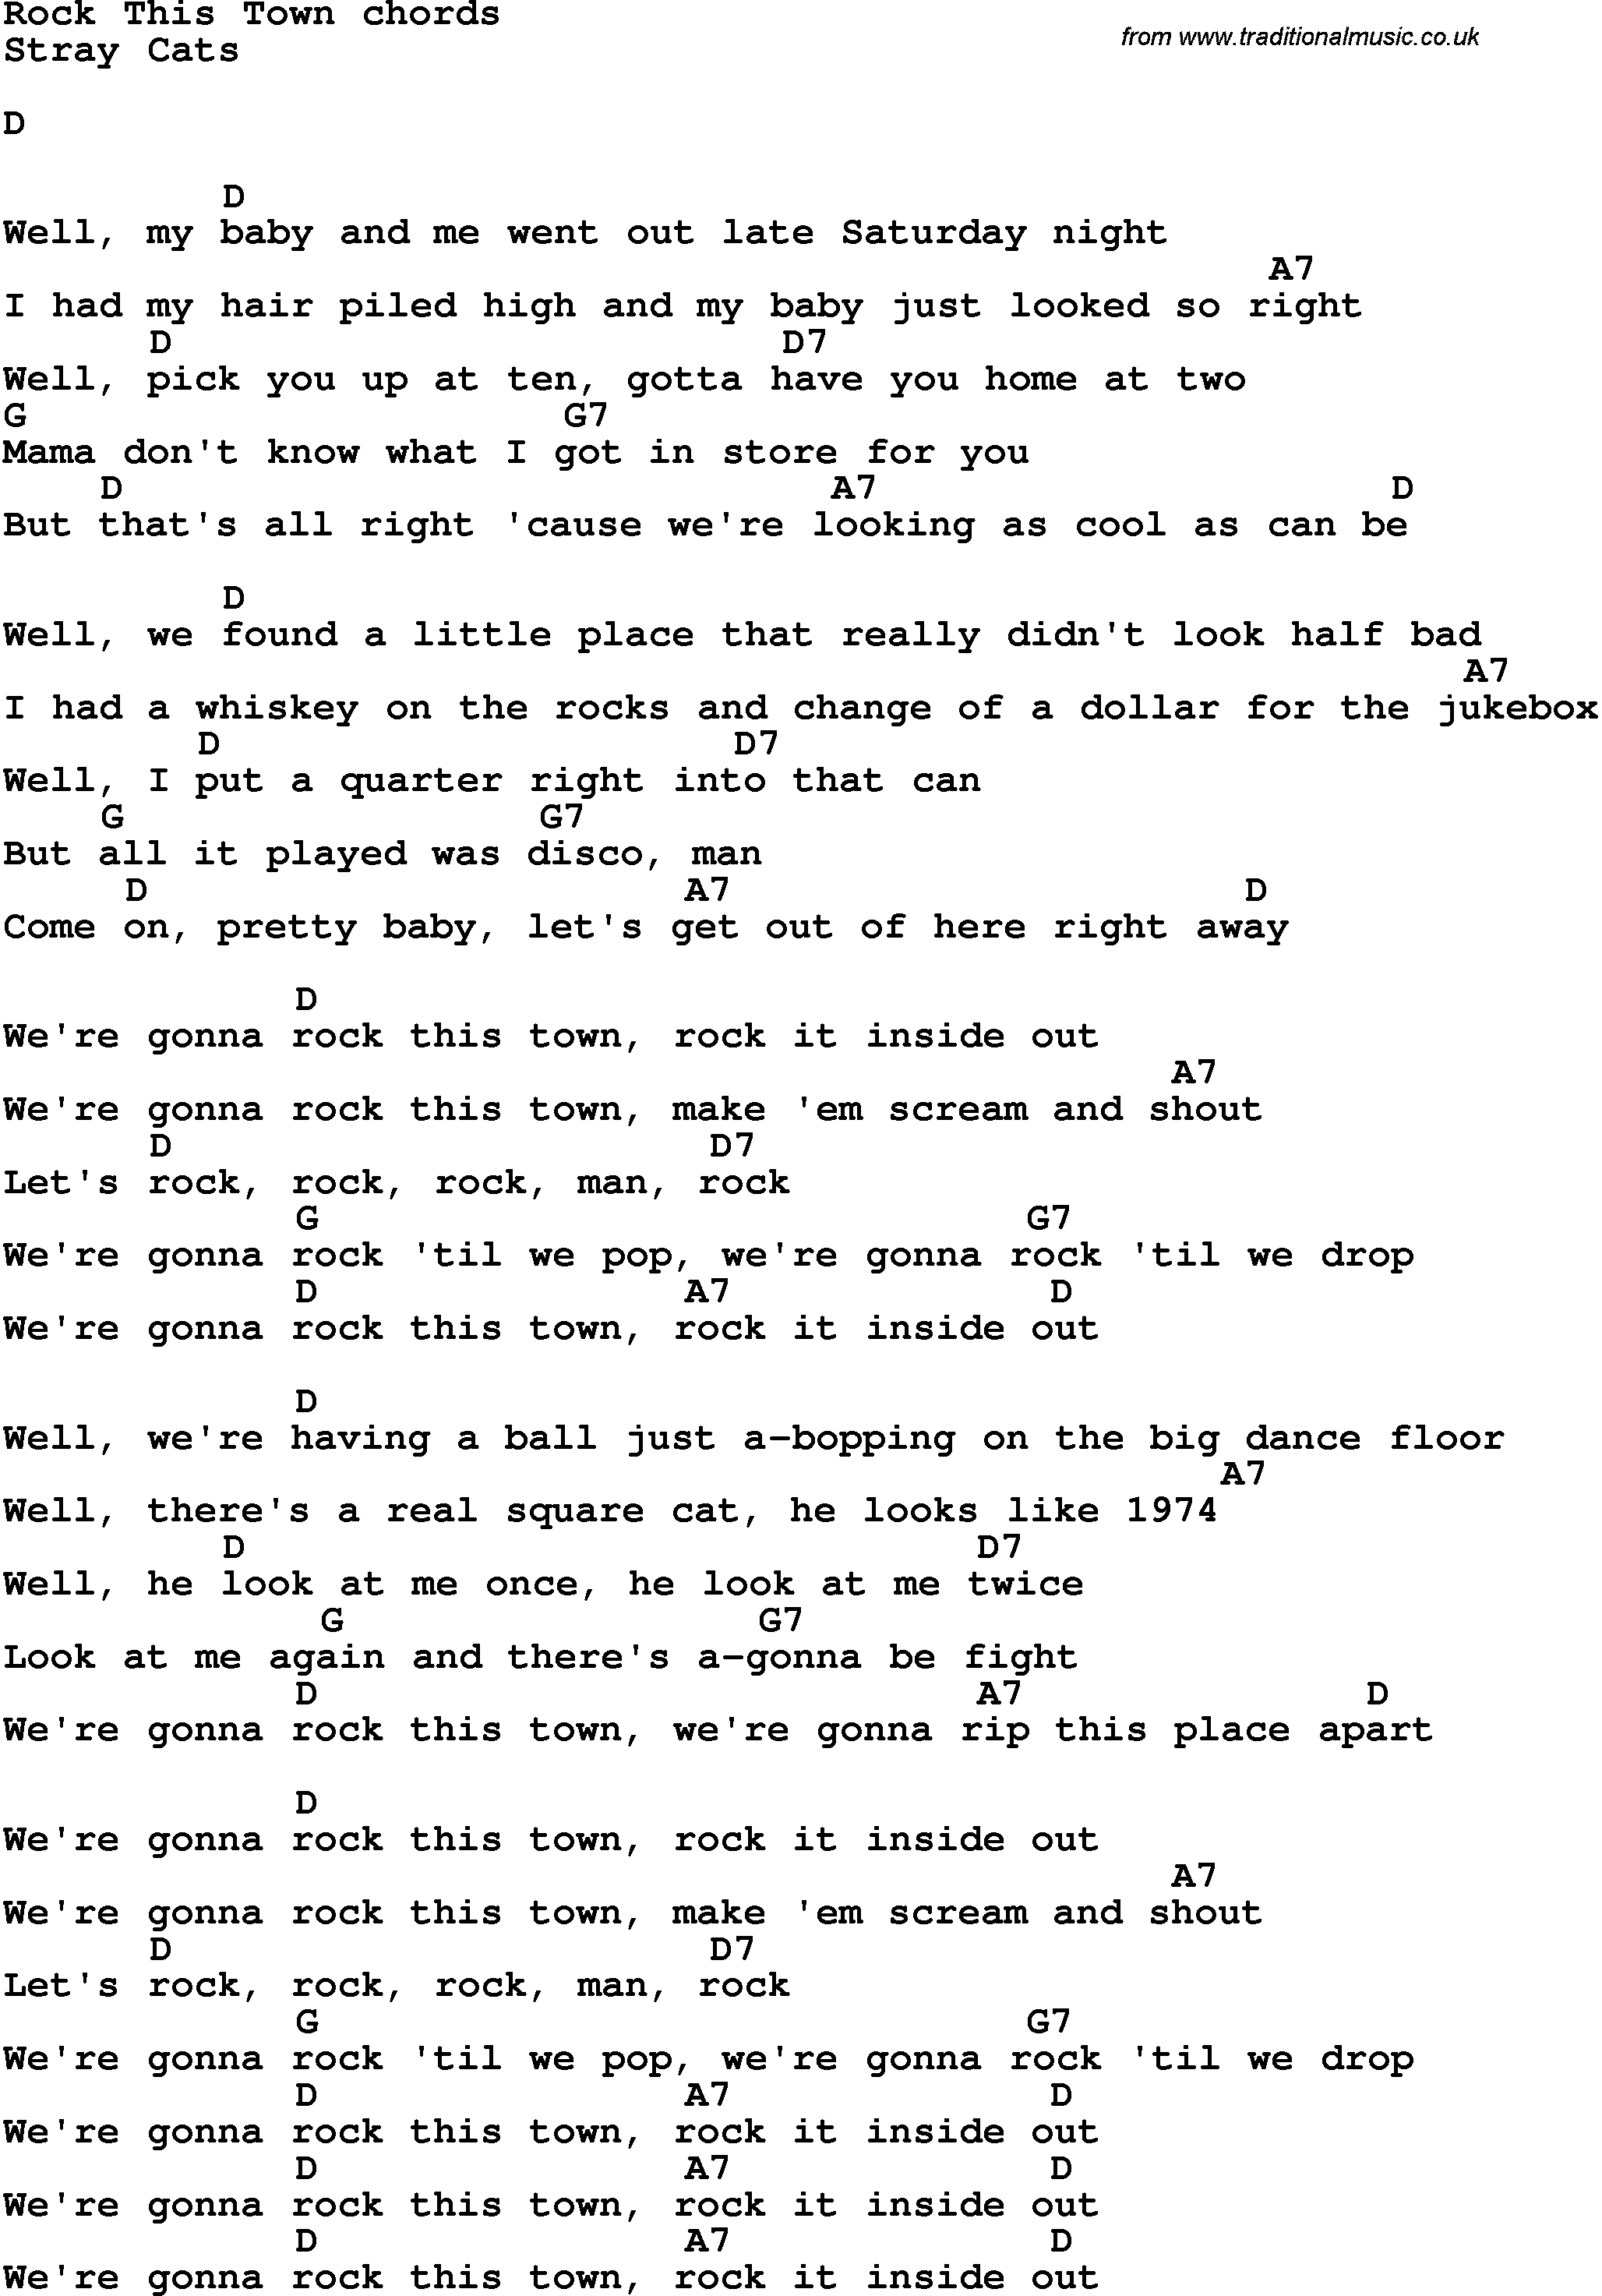 Song Lyrics With Guitar Chords For Rock This Town